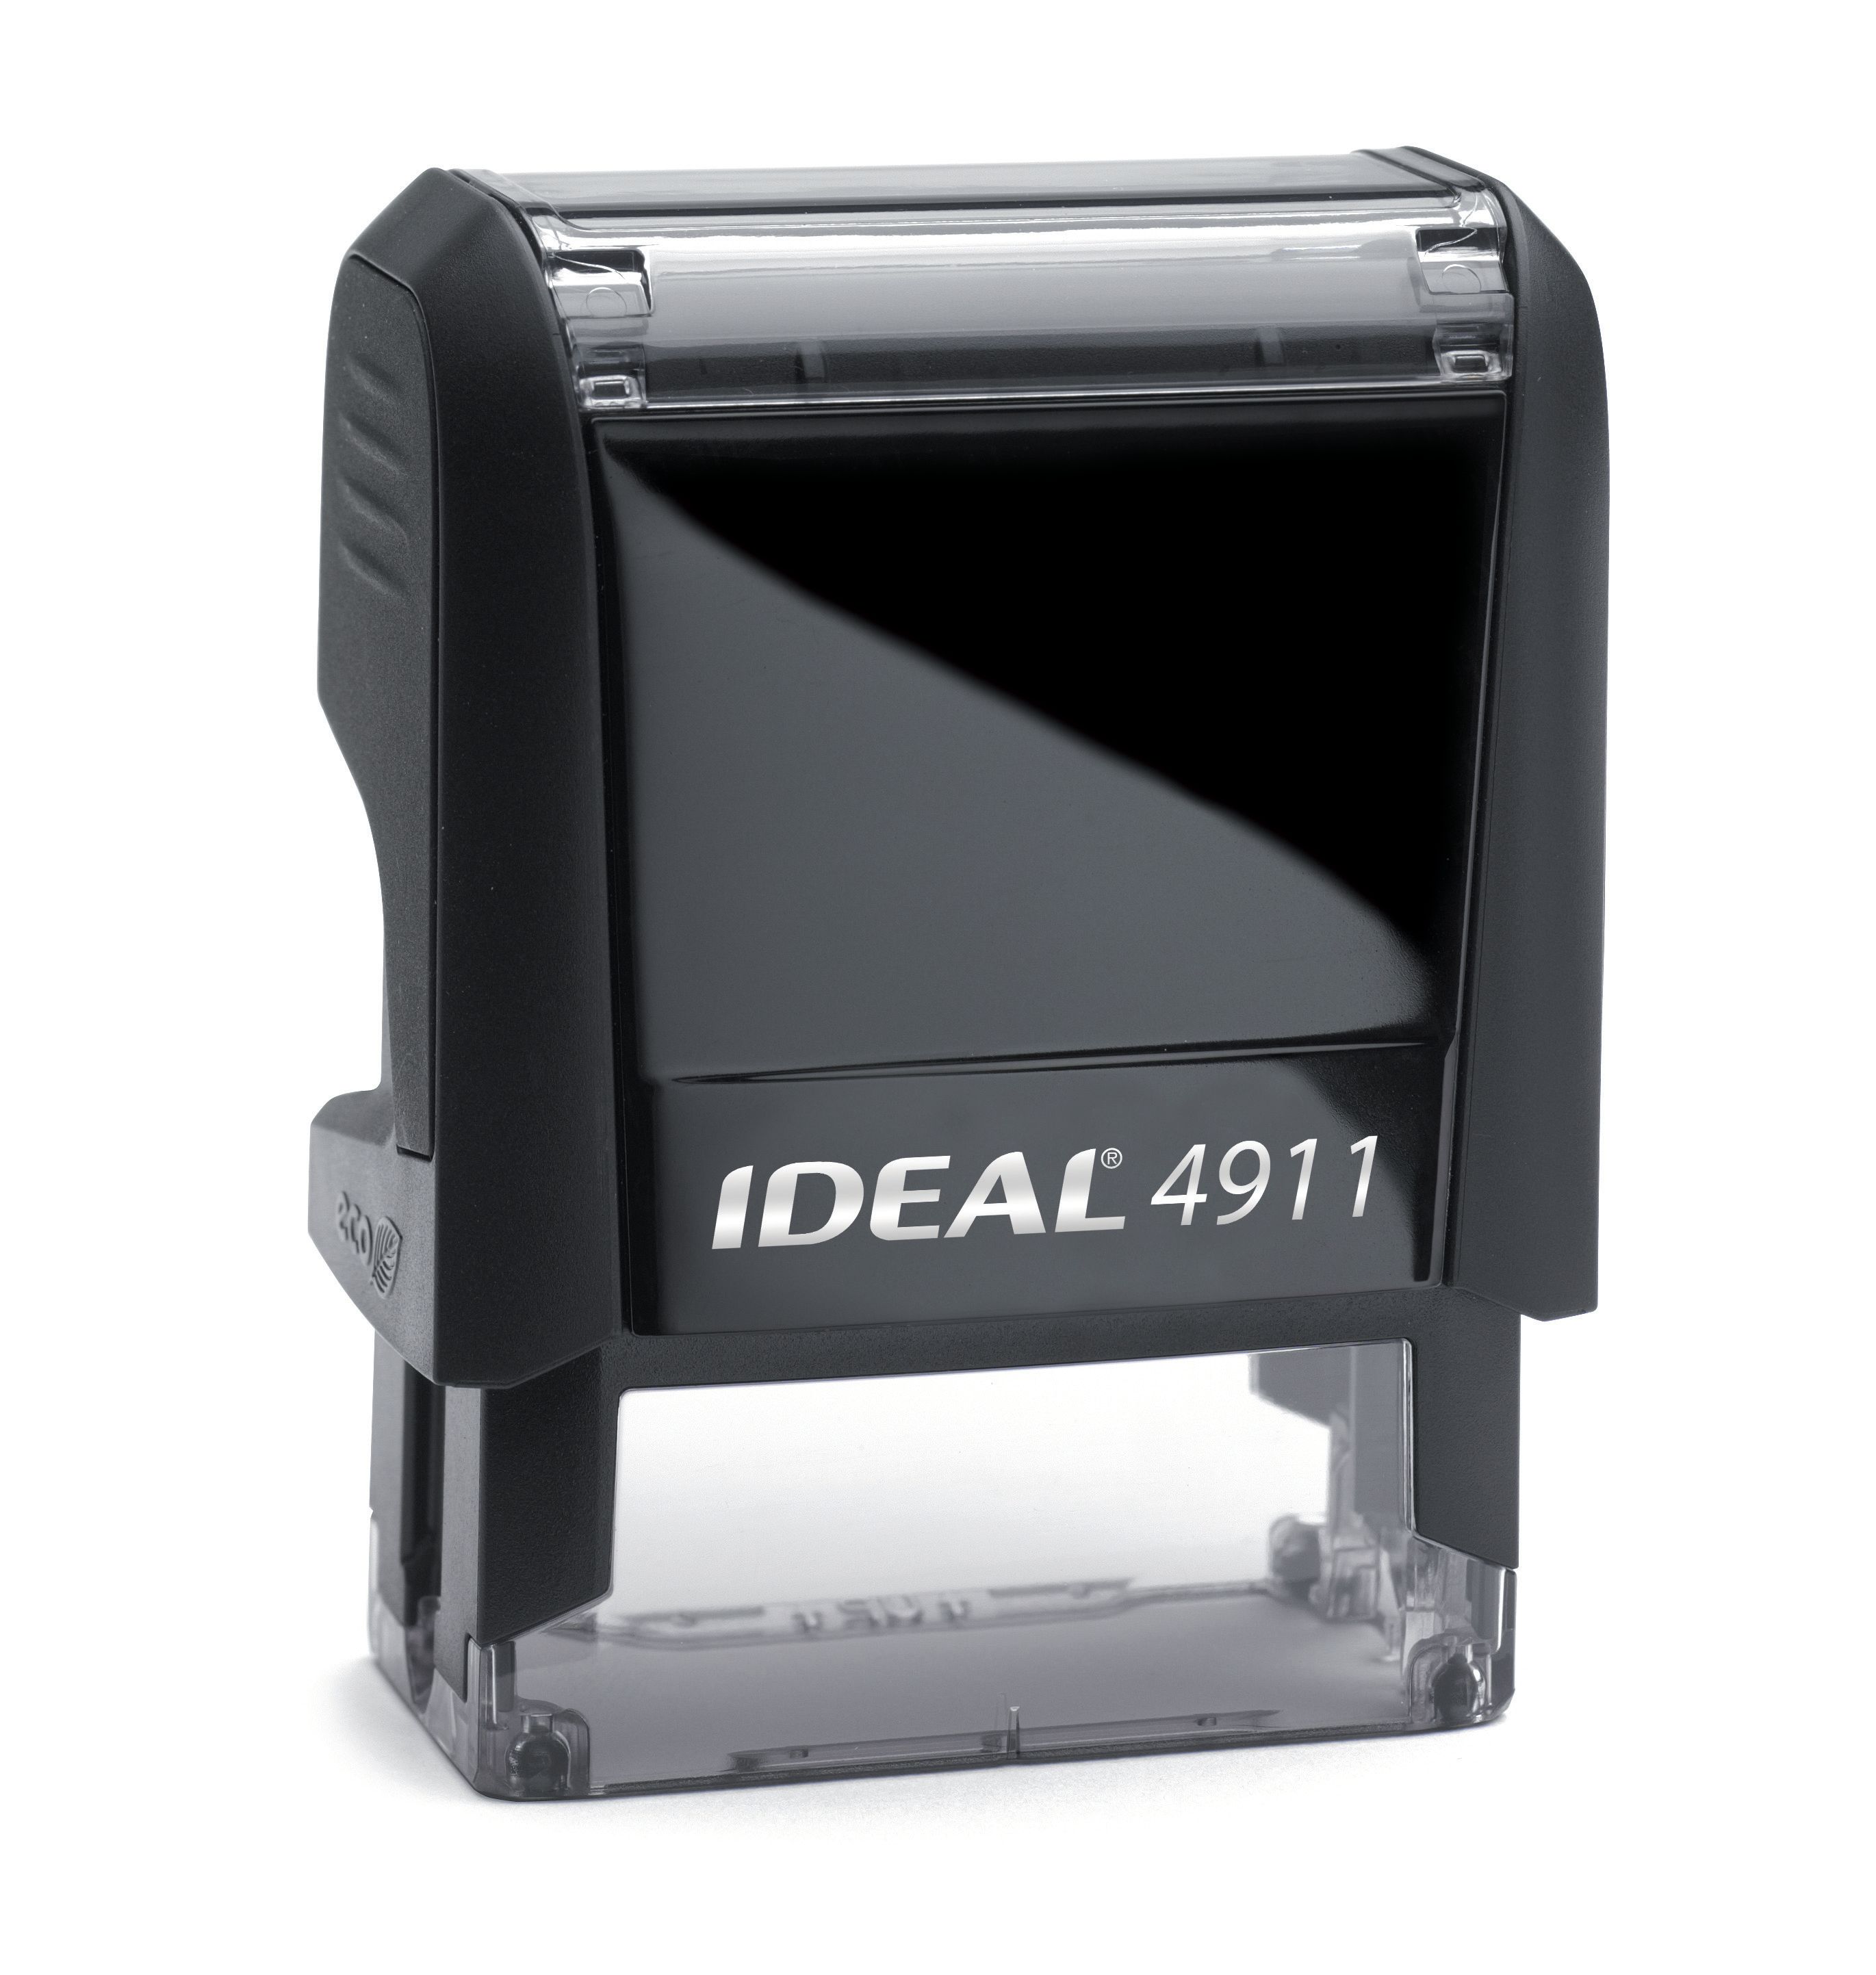 Ideal 4911 Self Inking Stamp